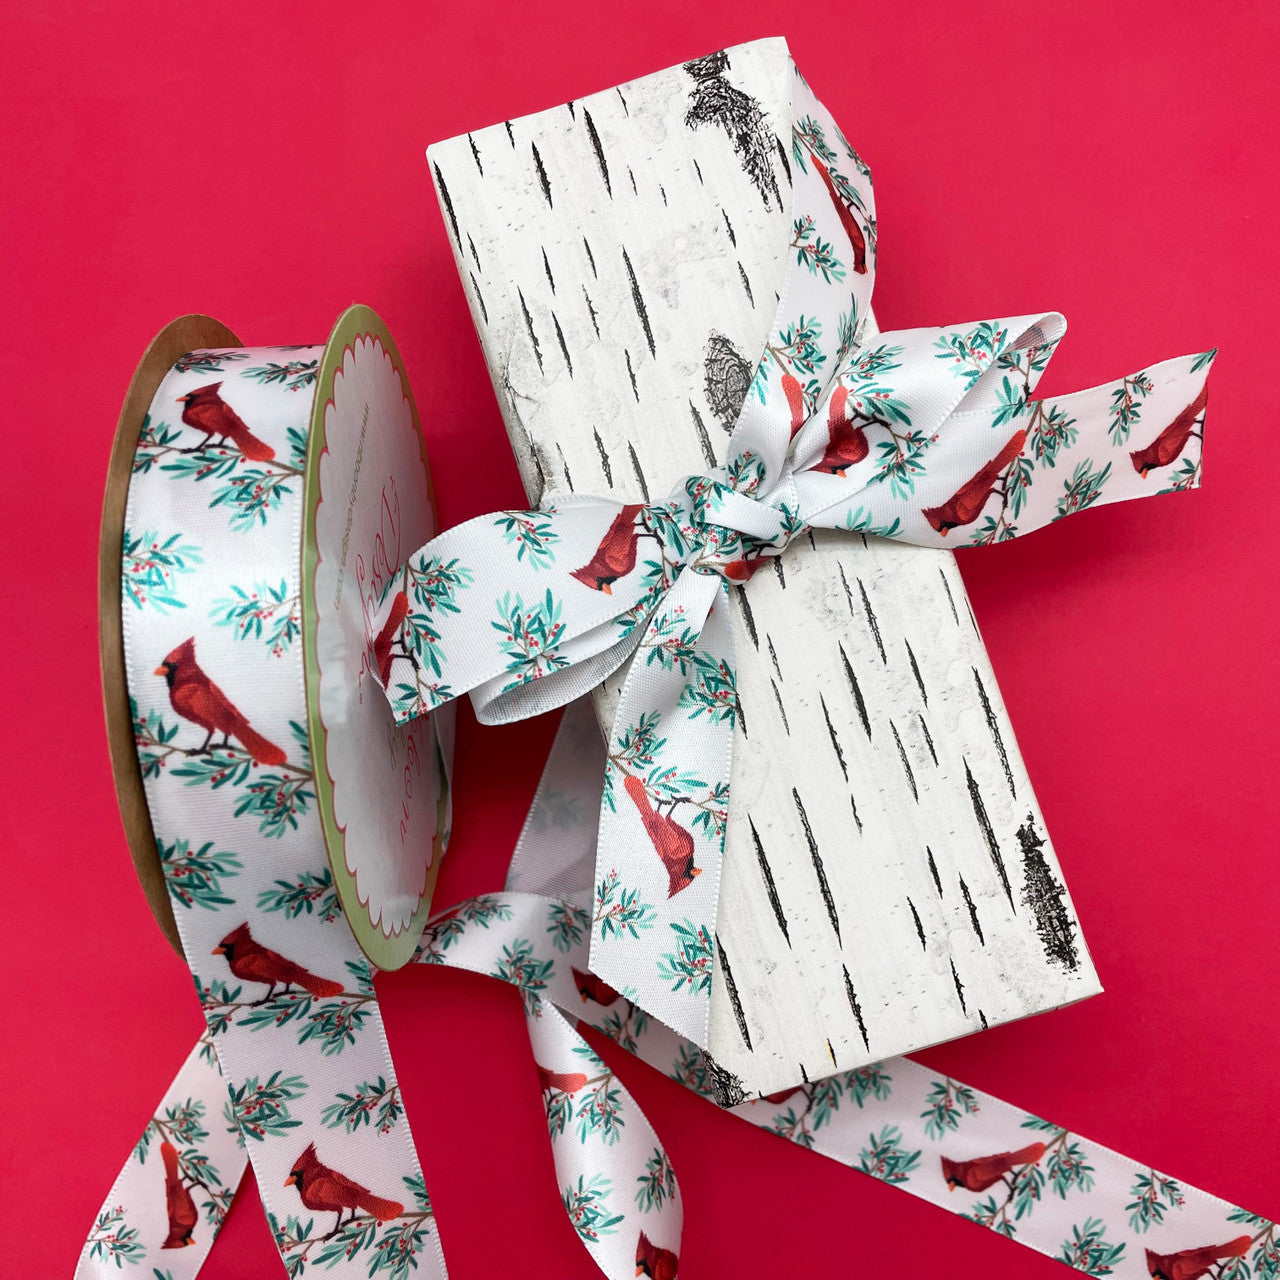 Our cardinal ribbon makes a handsome statement on a simple birch bark print wrapping paper!